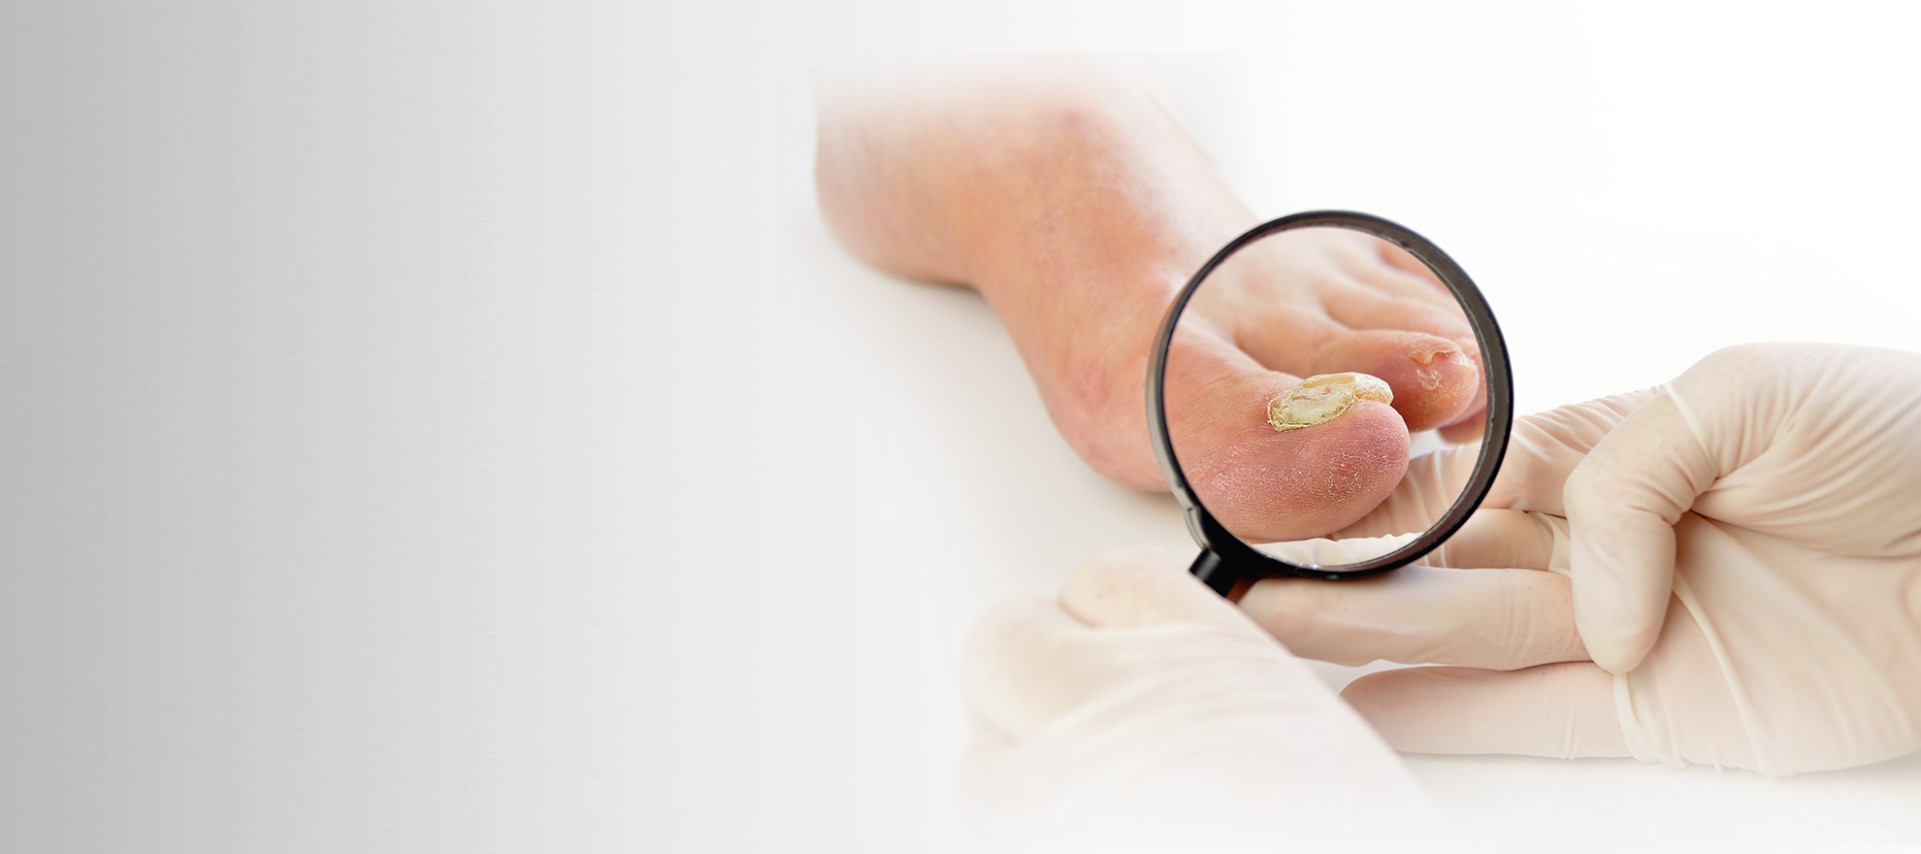 Advanced technology in SWIFT Wart Removal, MLS Laser Treatment and 3D Custom Orthotics